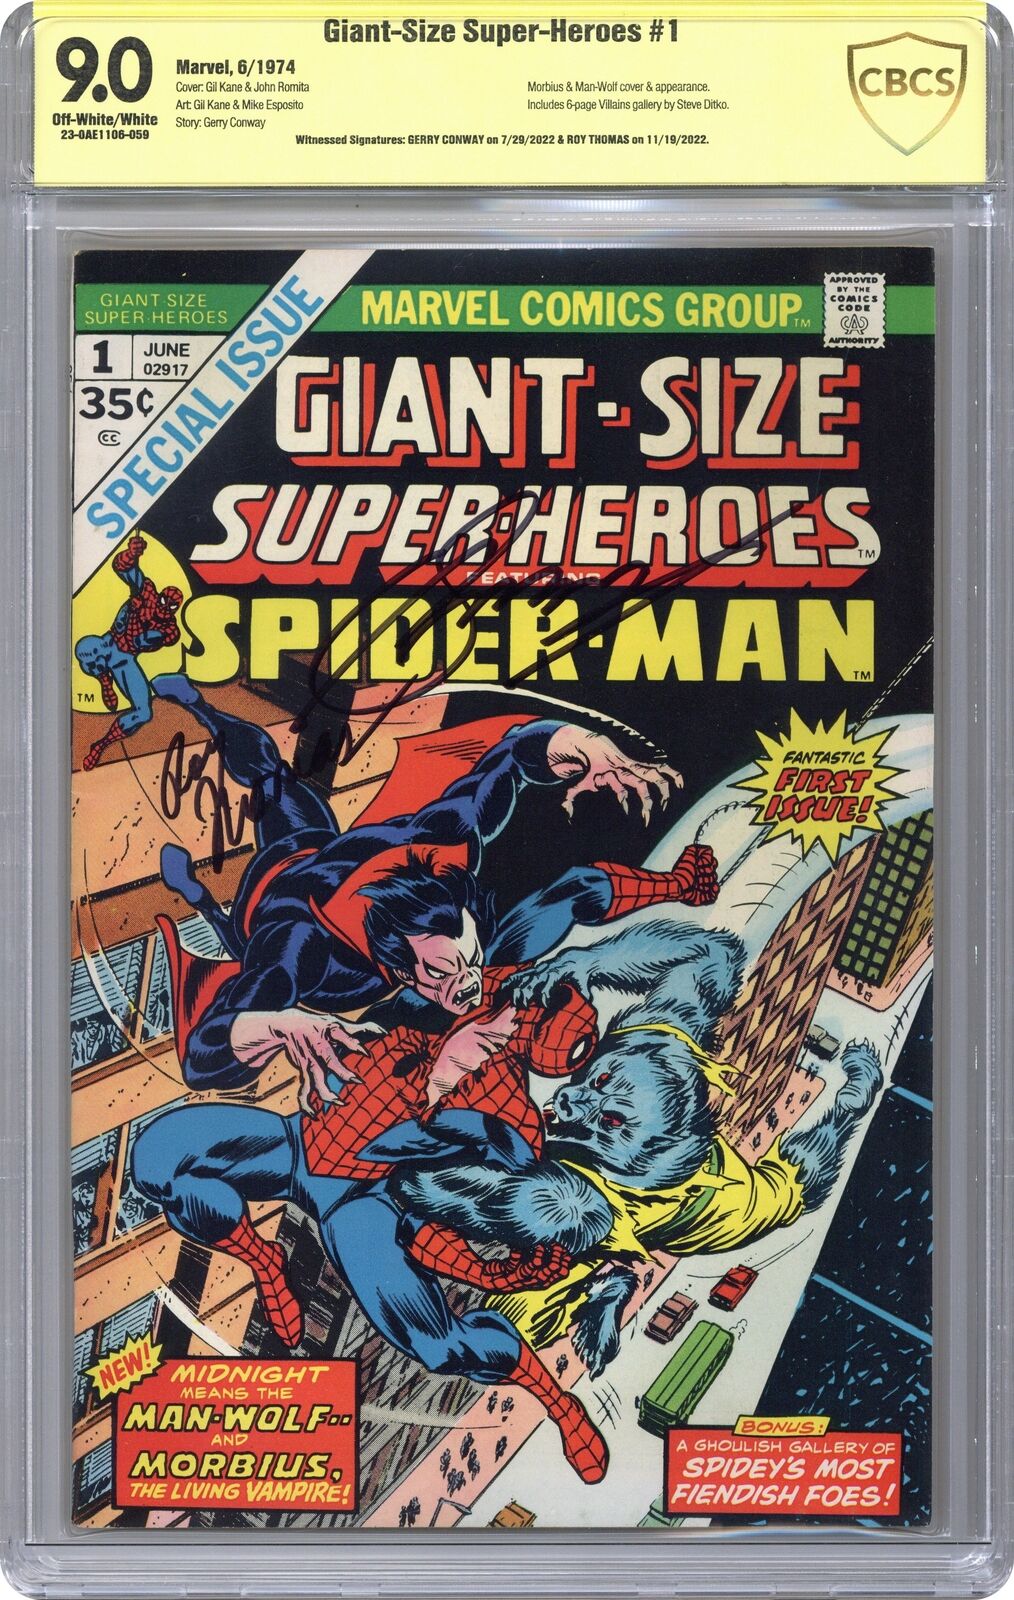 Giant Size Super Heroes Featuring Spider-Man #1 CBCS 9.0 SS Conway/Thomas 1974